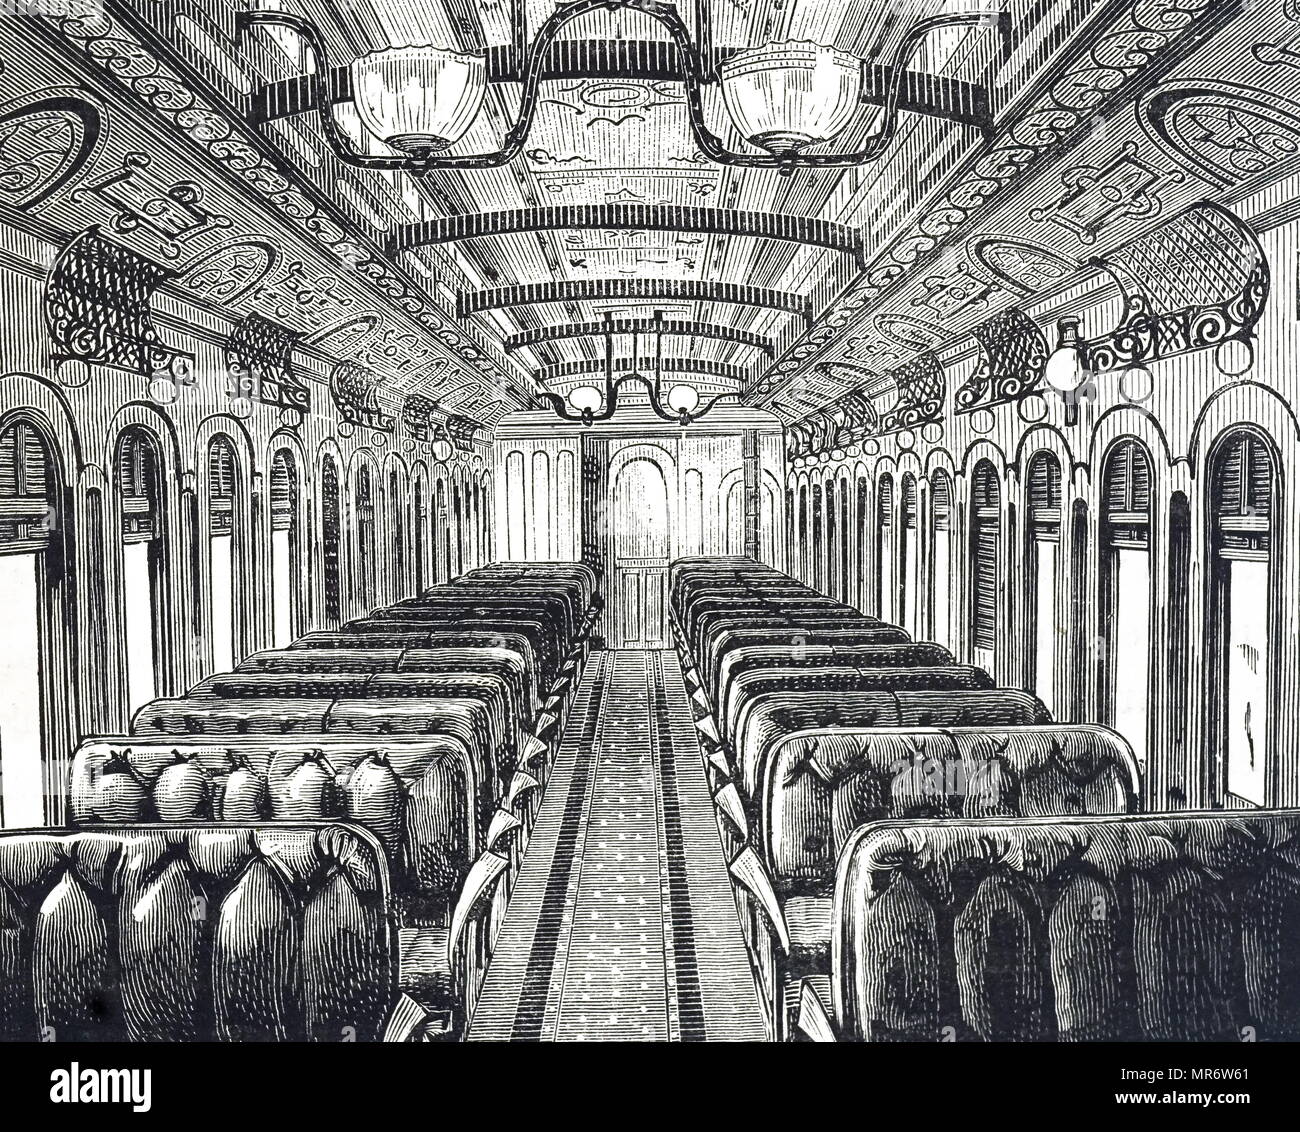 Engraving depicting a typical railway car on an American train. Dated 19th century Stock Photo